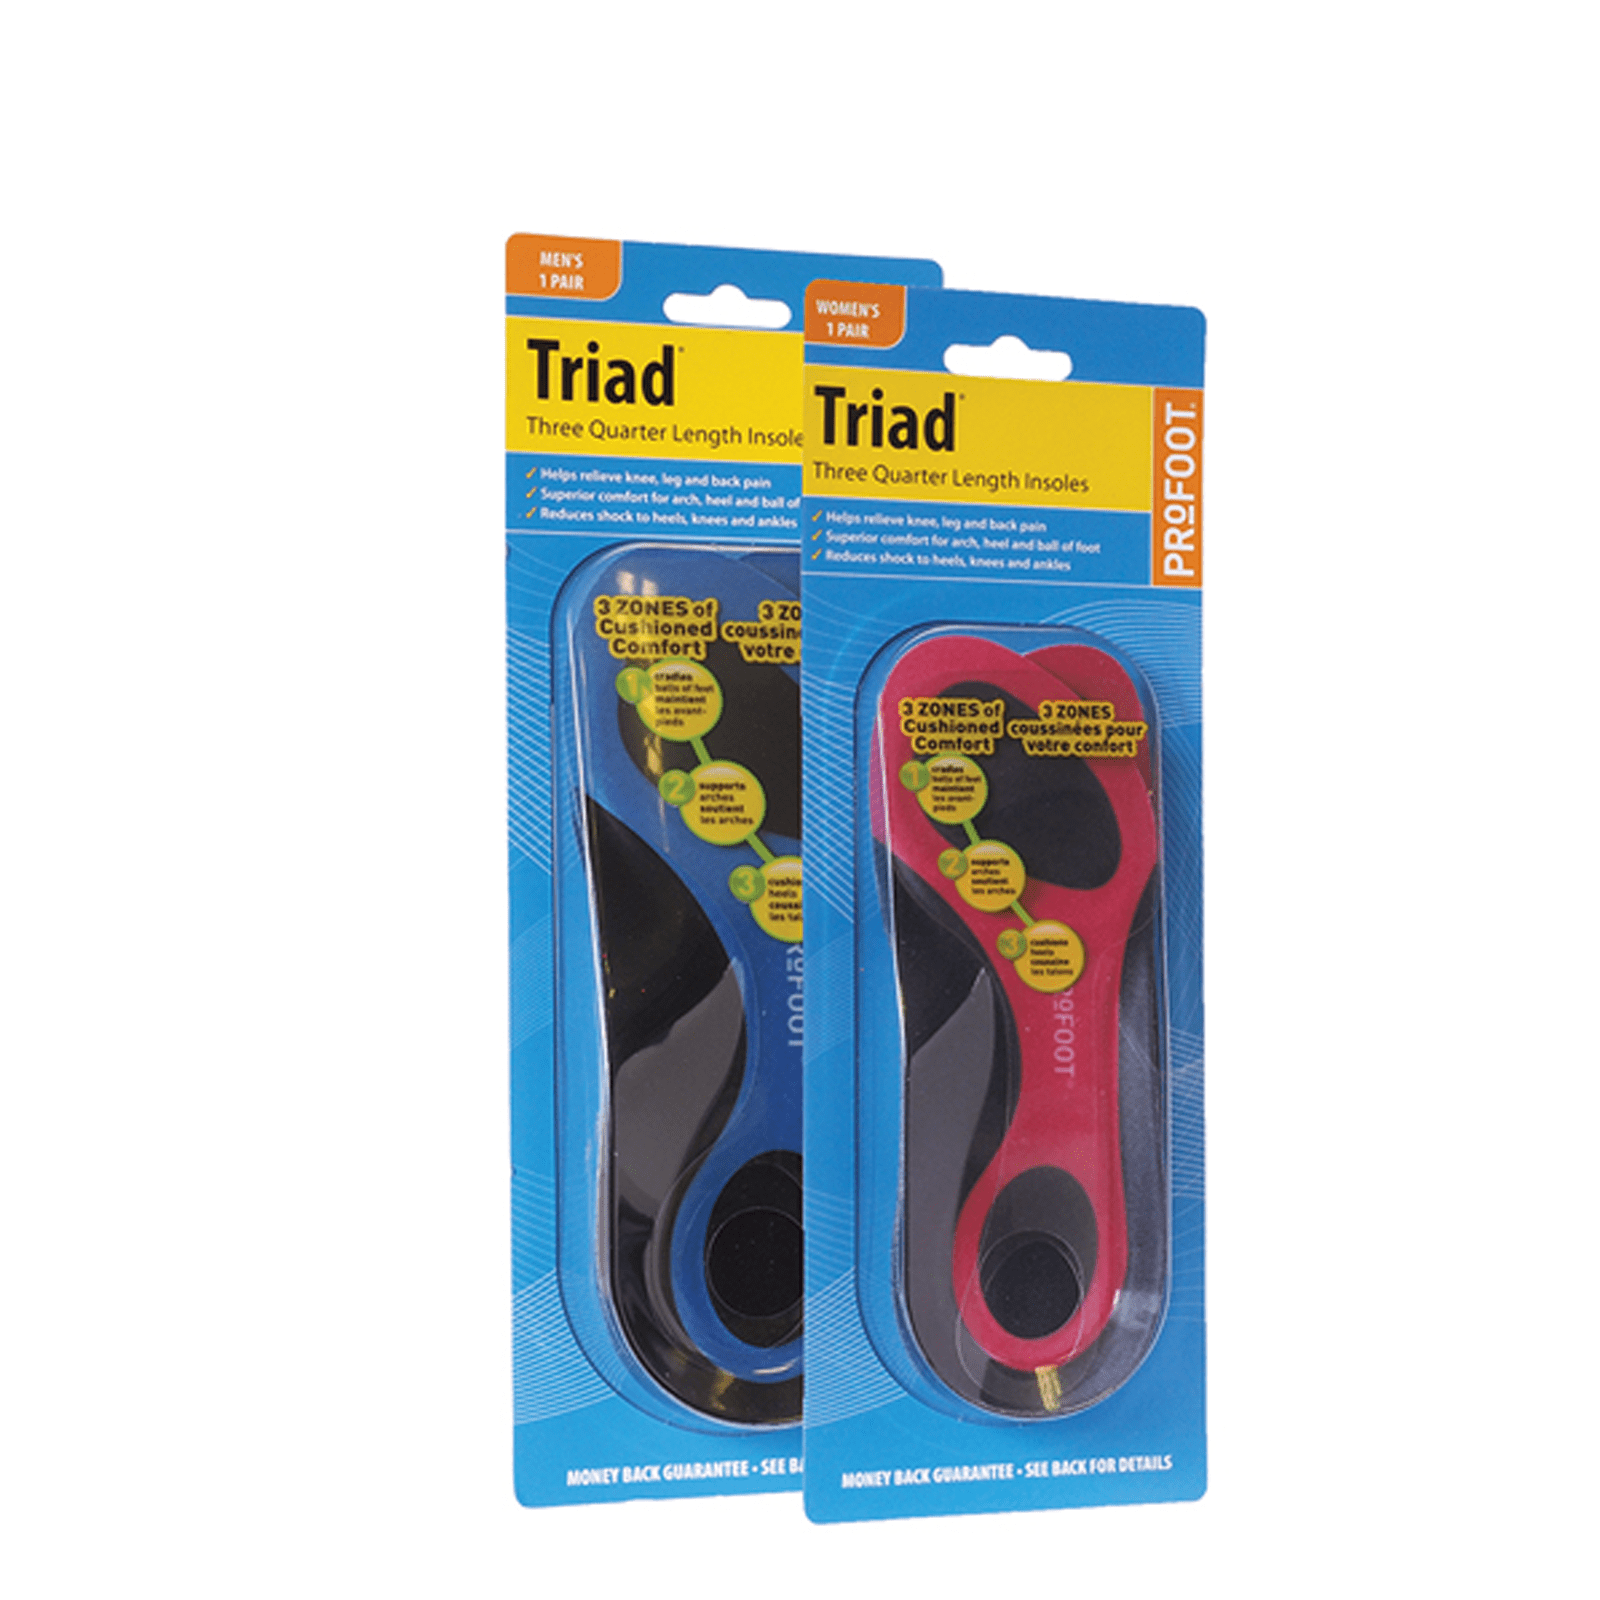 Profoot 3/4 Insole Mens 1 Pair